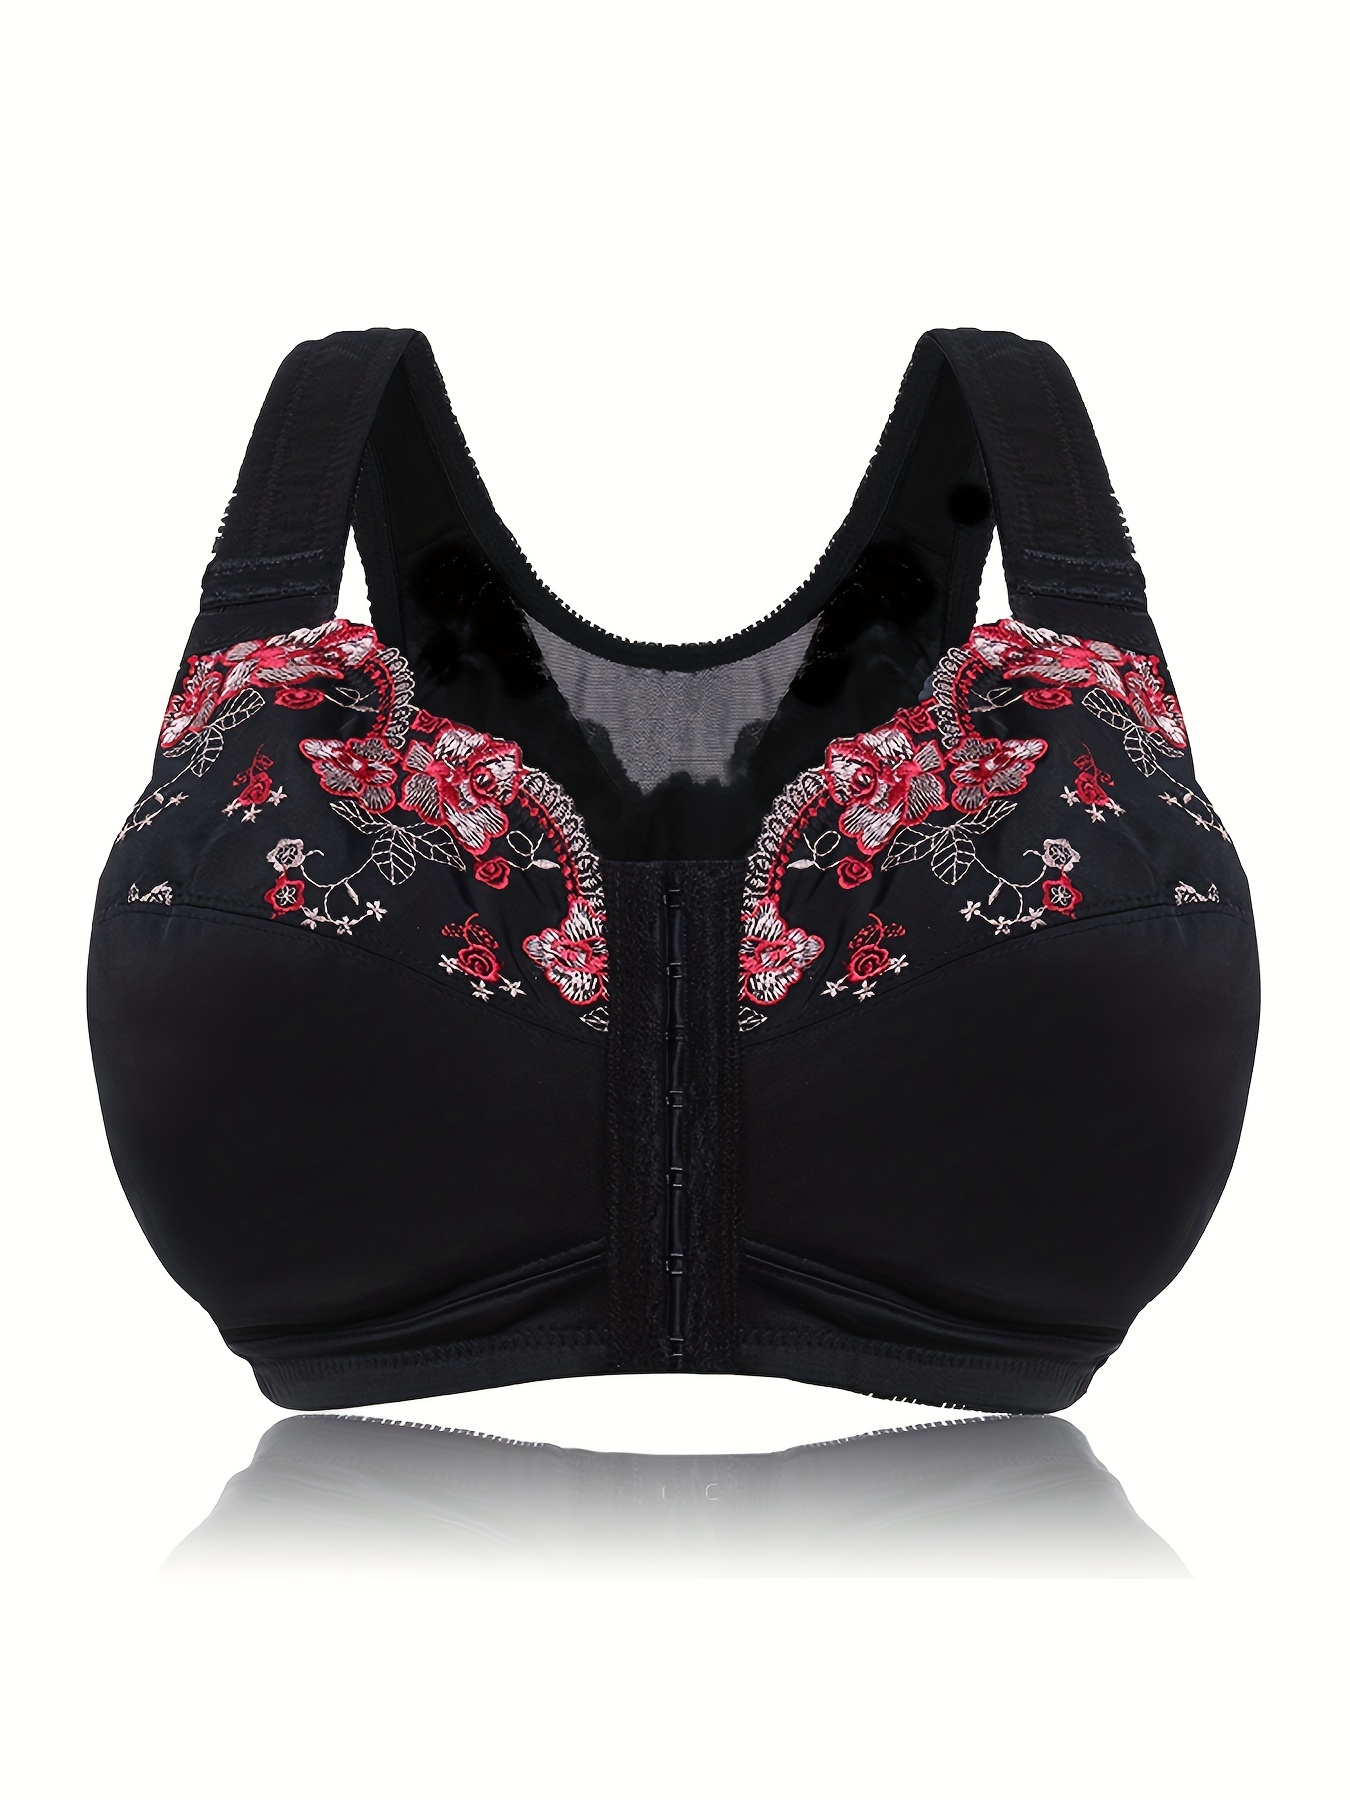 Bras for Women Push Up No Underwire Floral Sports Bra Plus Size